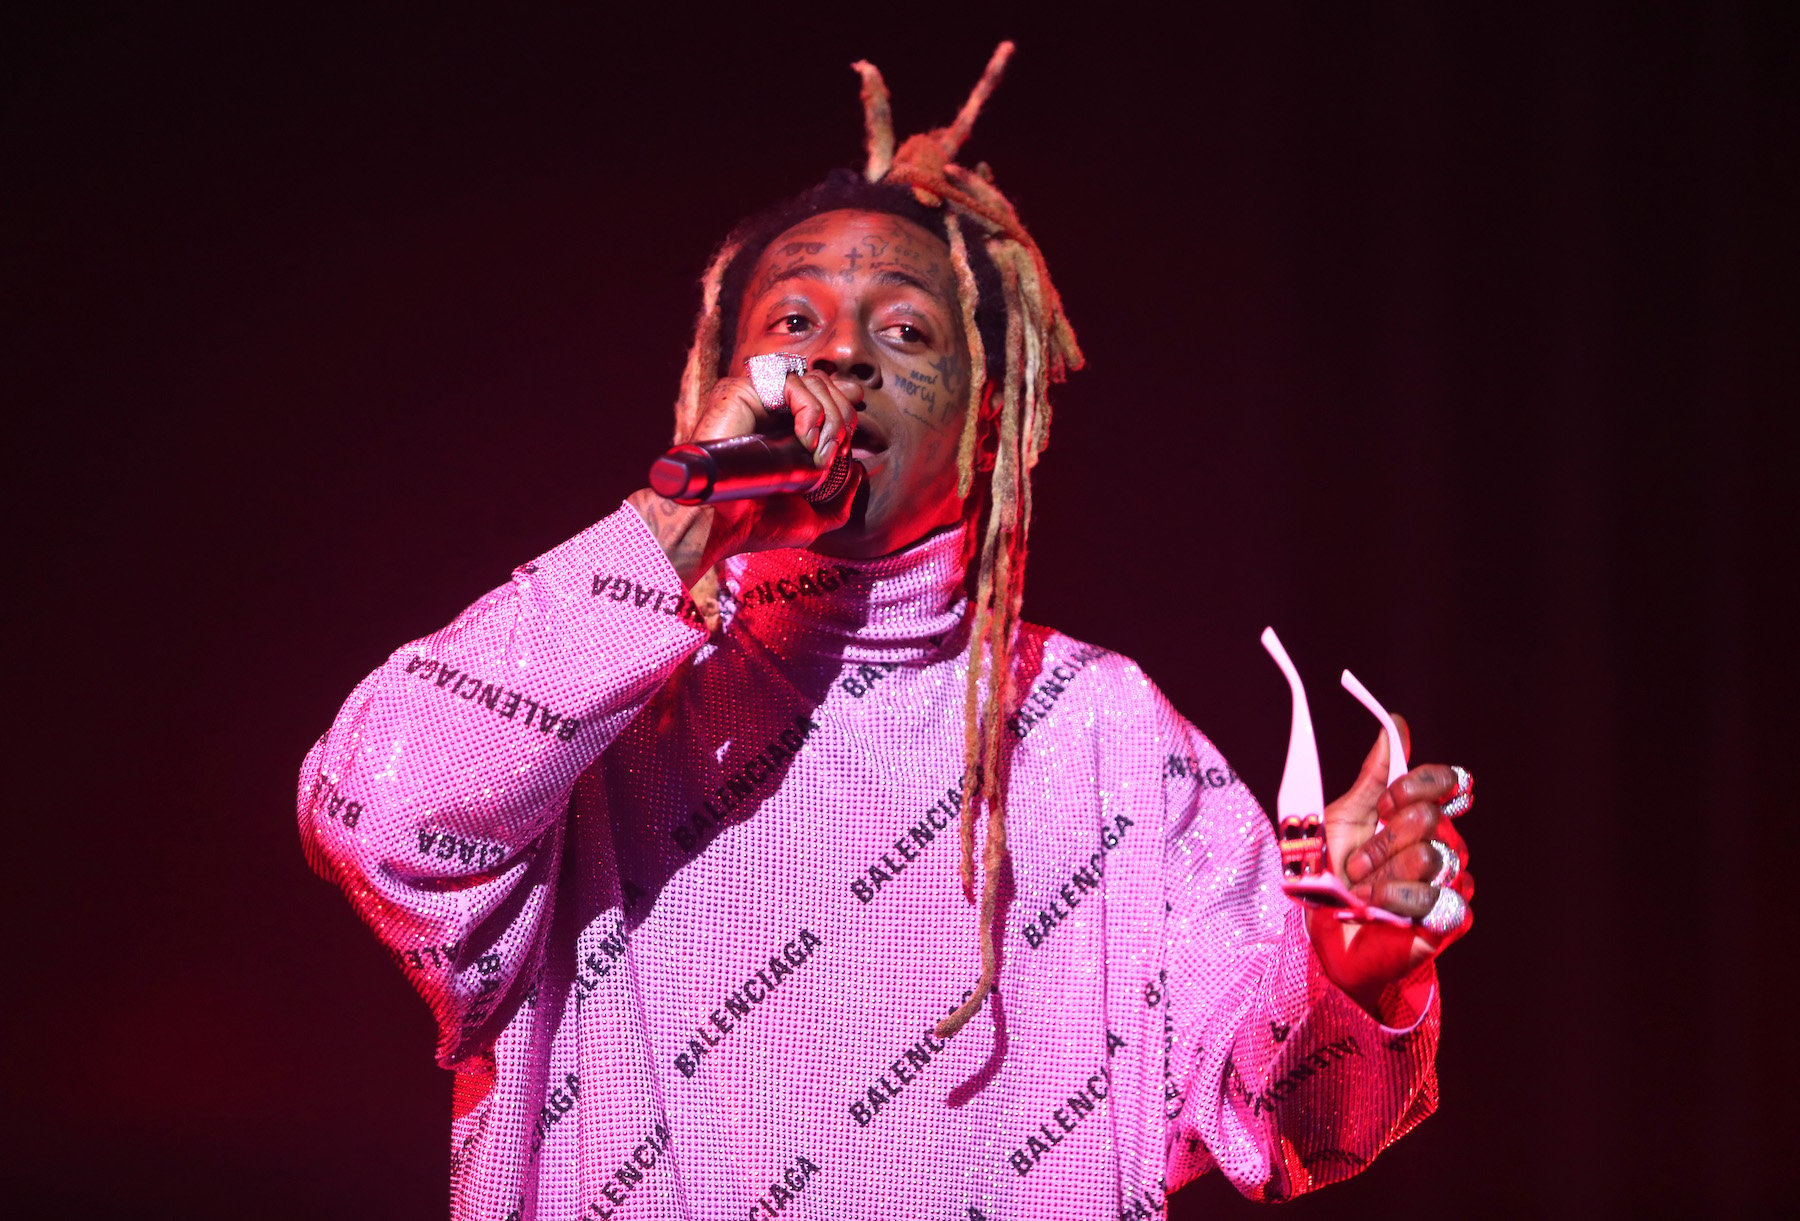 Lil Wayne, who once received a presidential pardon, on stage wearing a pink sweater